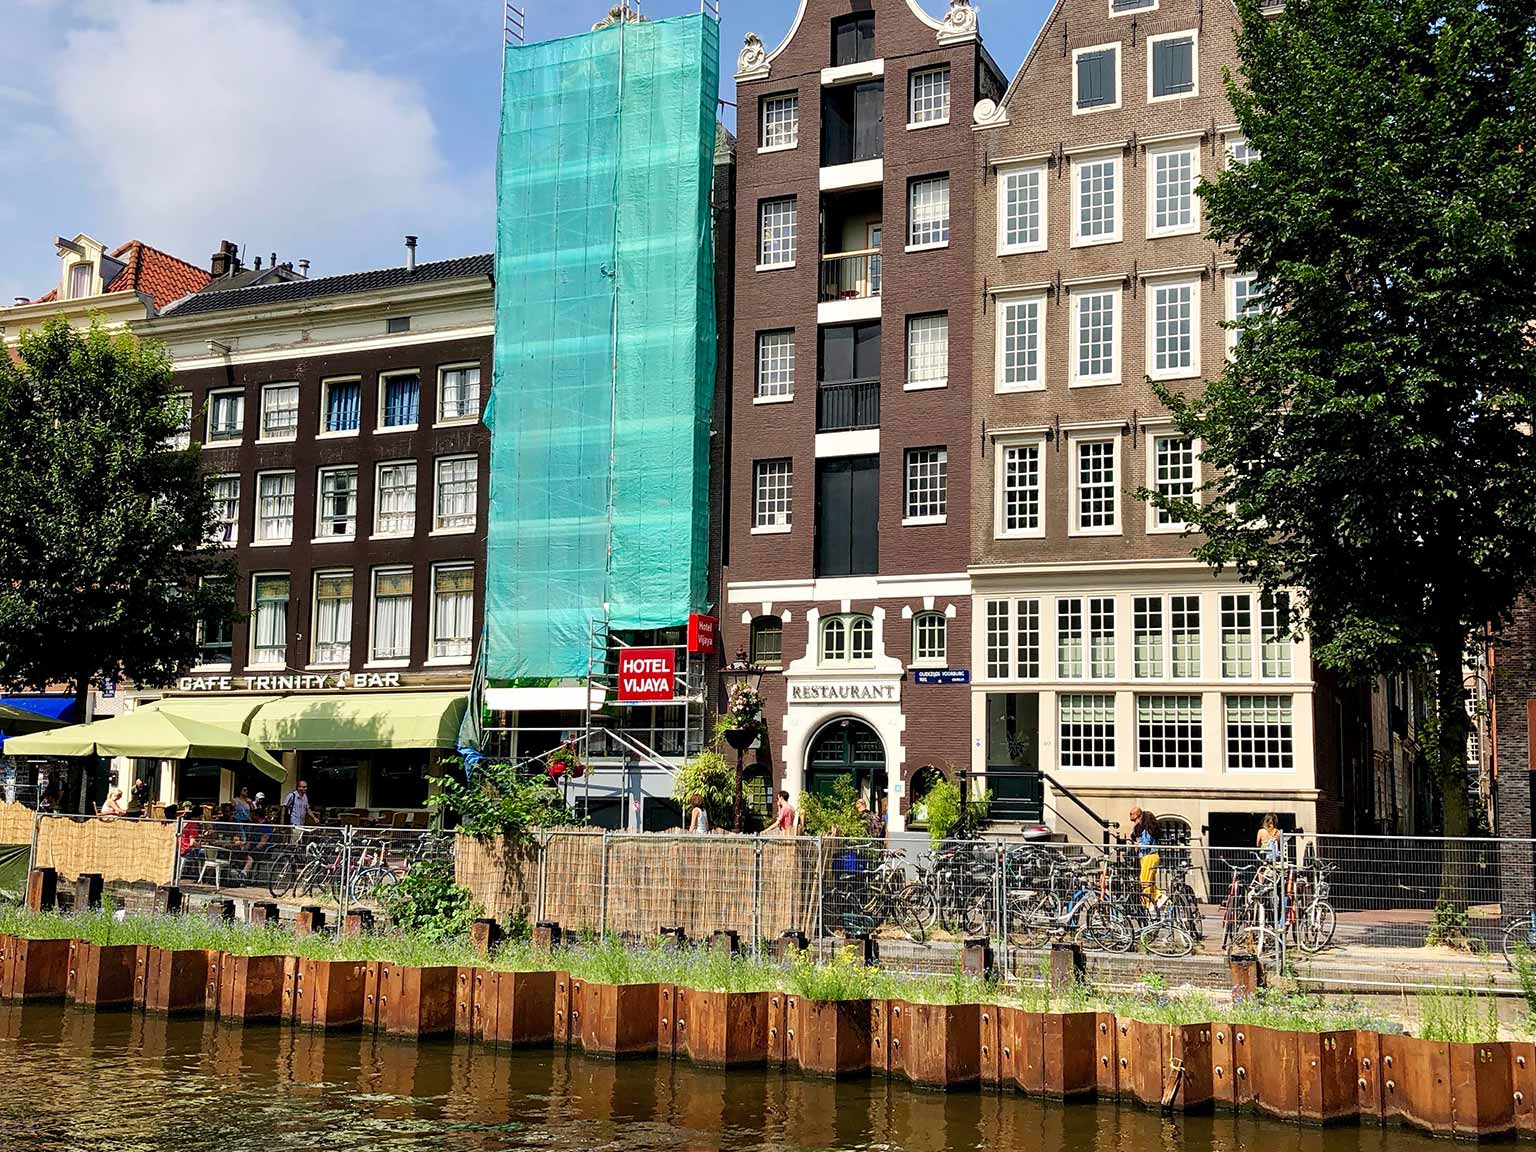 Oudezijds Voorburgwal, Amsterdam with temporary quay support wall (July 2019)